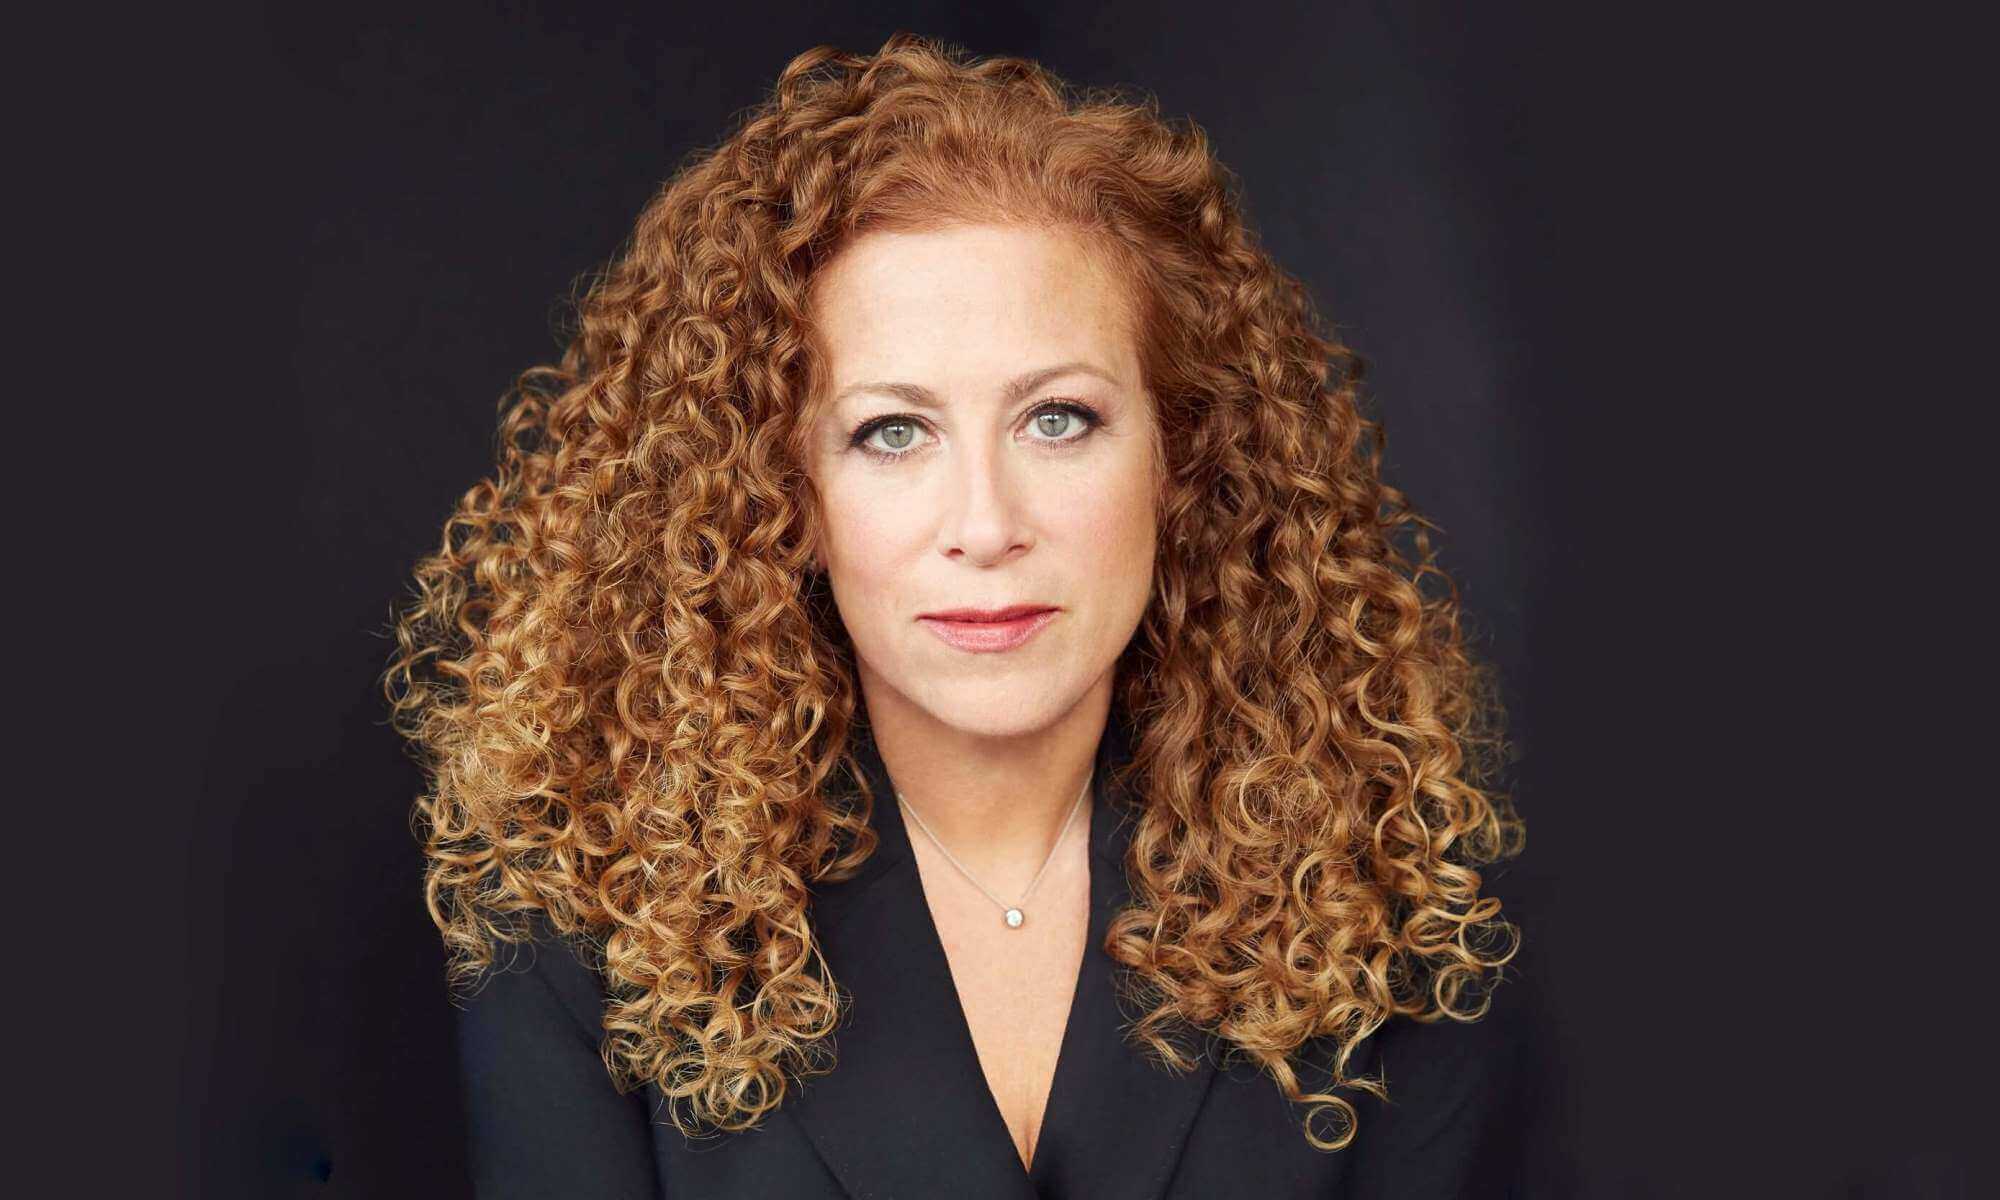 Interview with Best Selling Author: Jodi Picoult